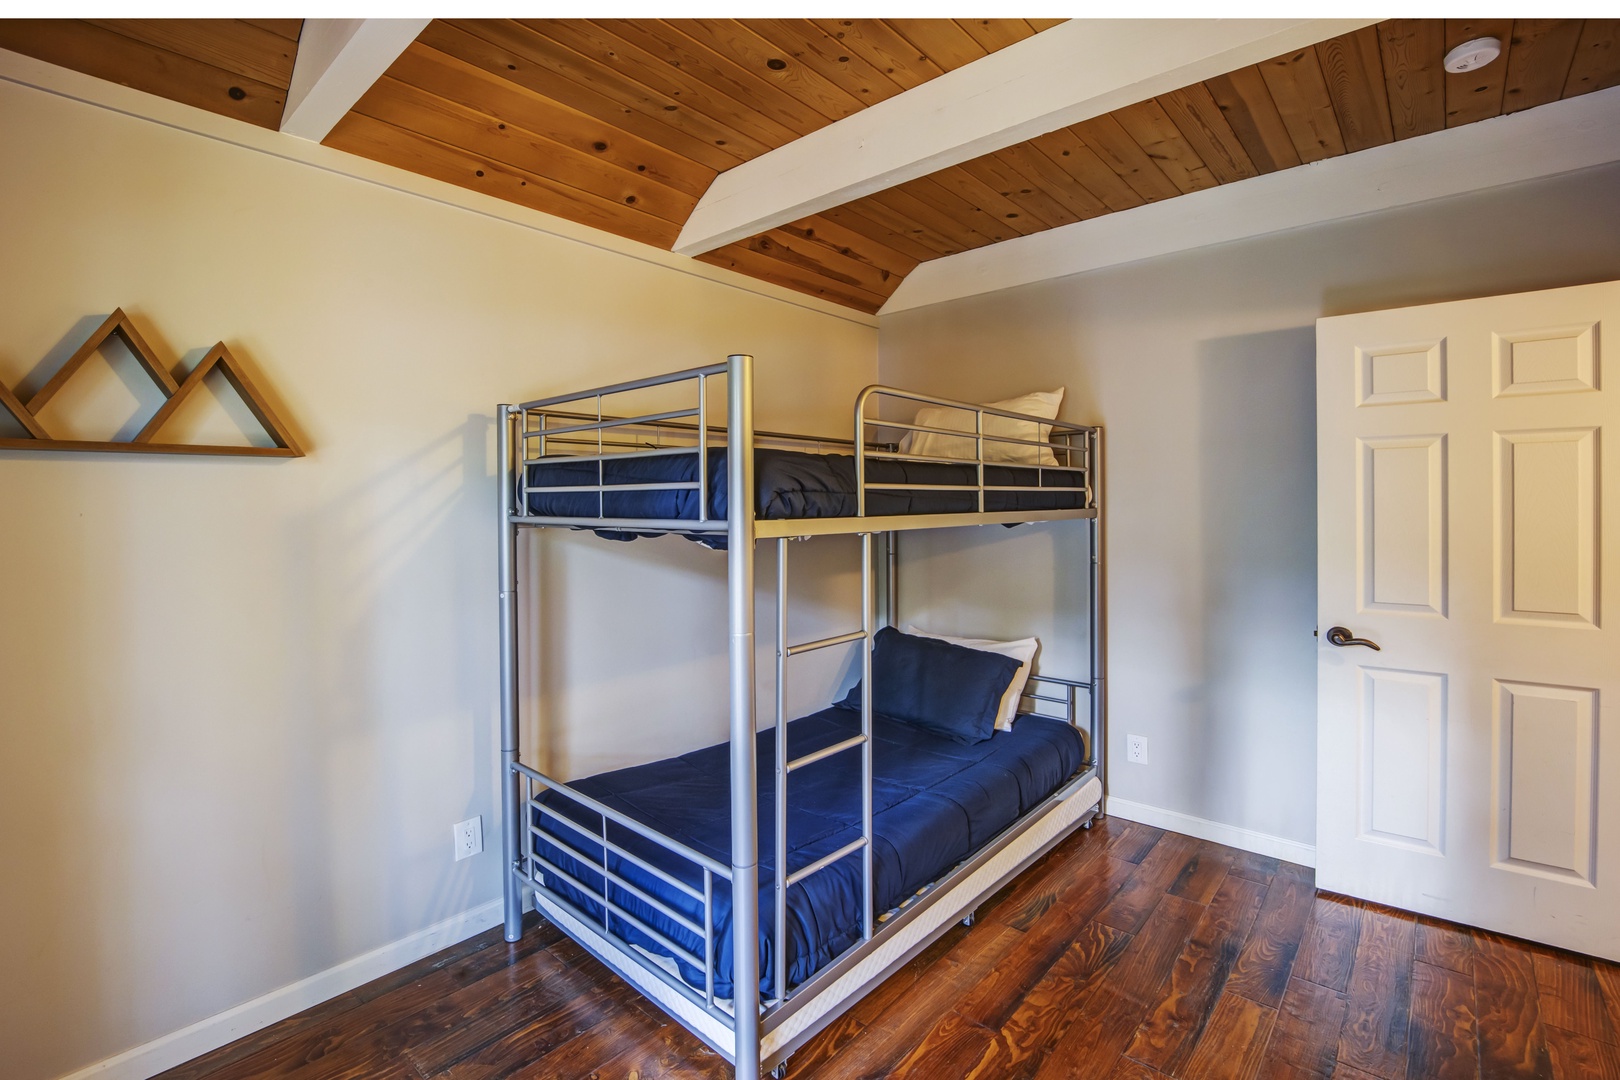 Bedroom 2 features a bunk bed